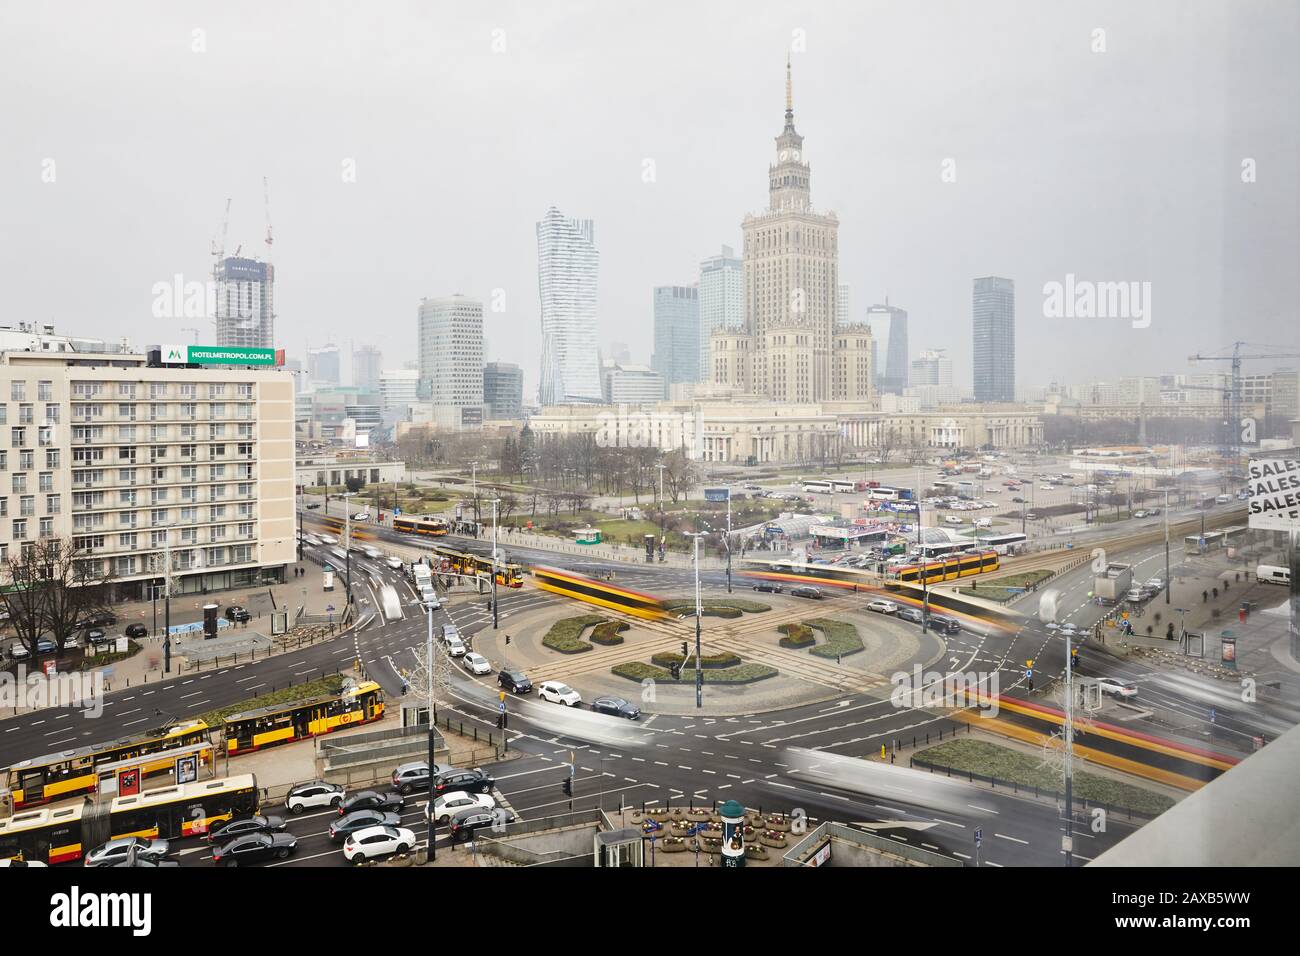 Cityscape of Warsaw, capital of Poland. View on Palace of Culture and Science, skyscrapers, Dmowski roundabout, trams and city traffic. Stock Photo